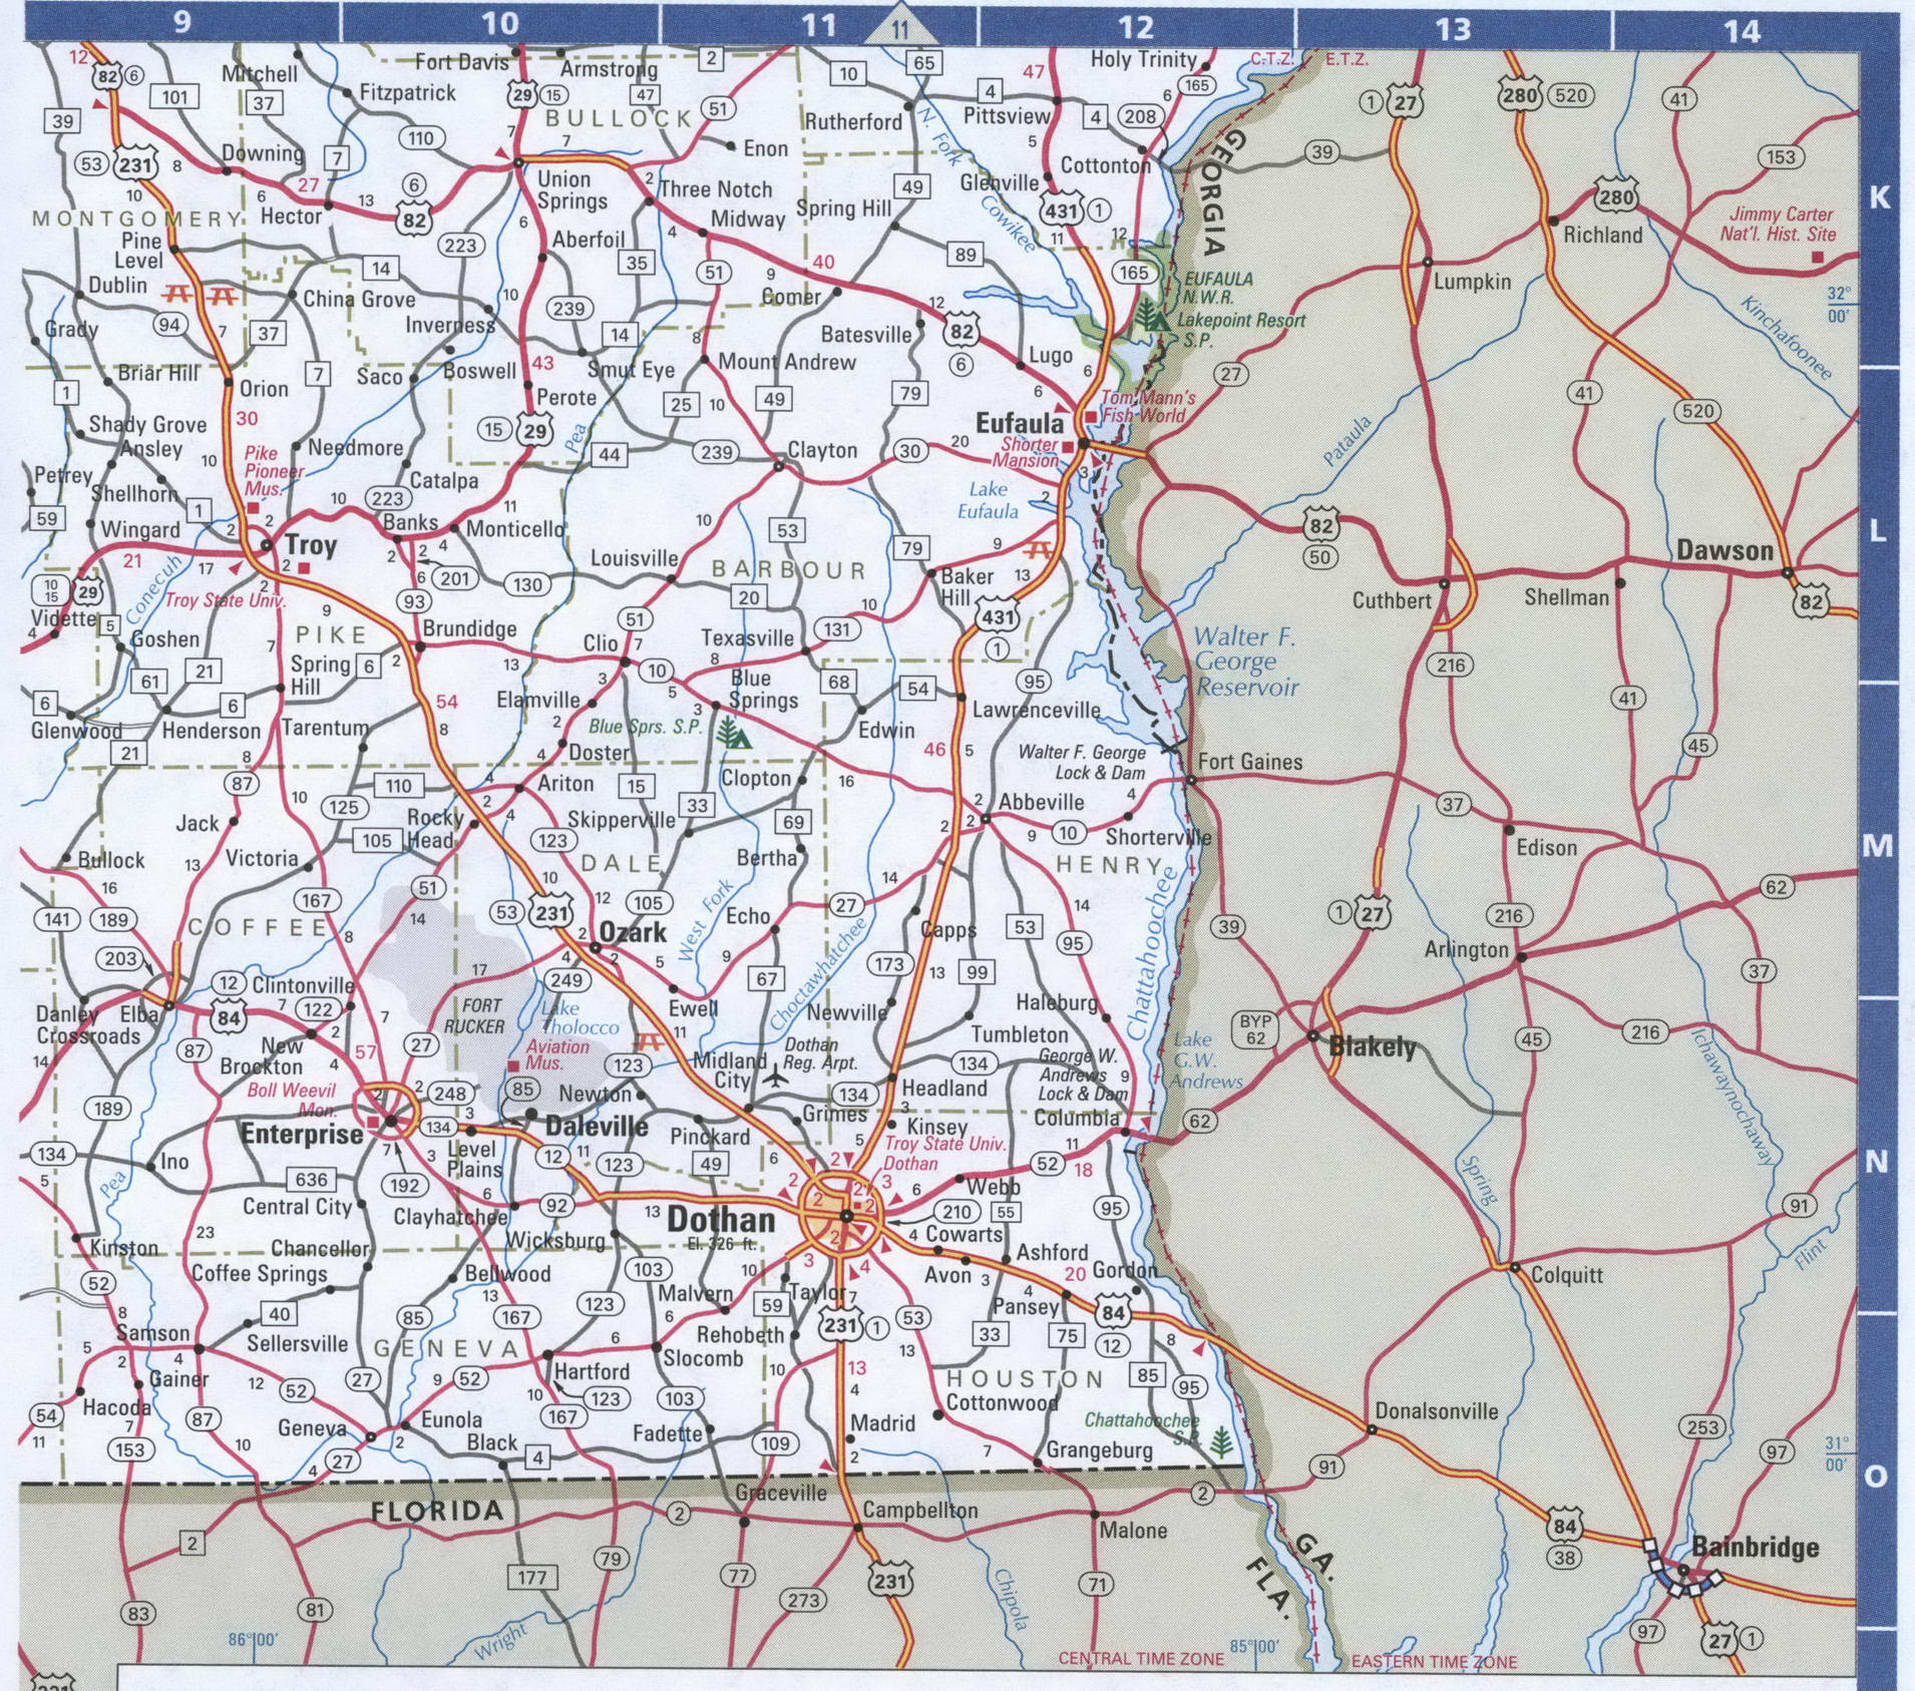 Alabama Southern Detailed Road Map Show State Map Of Alabama